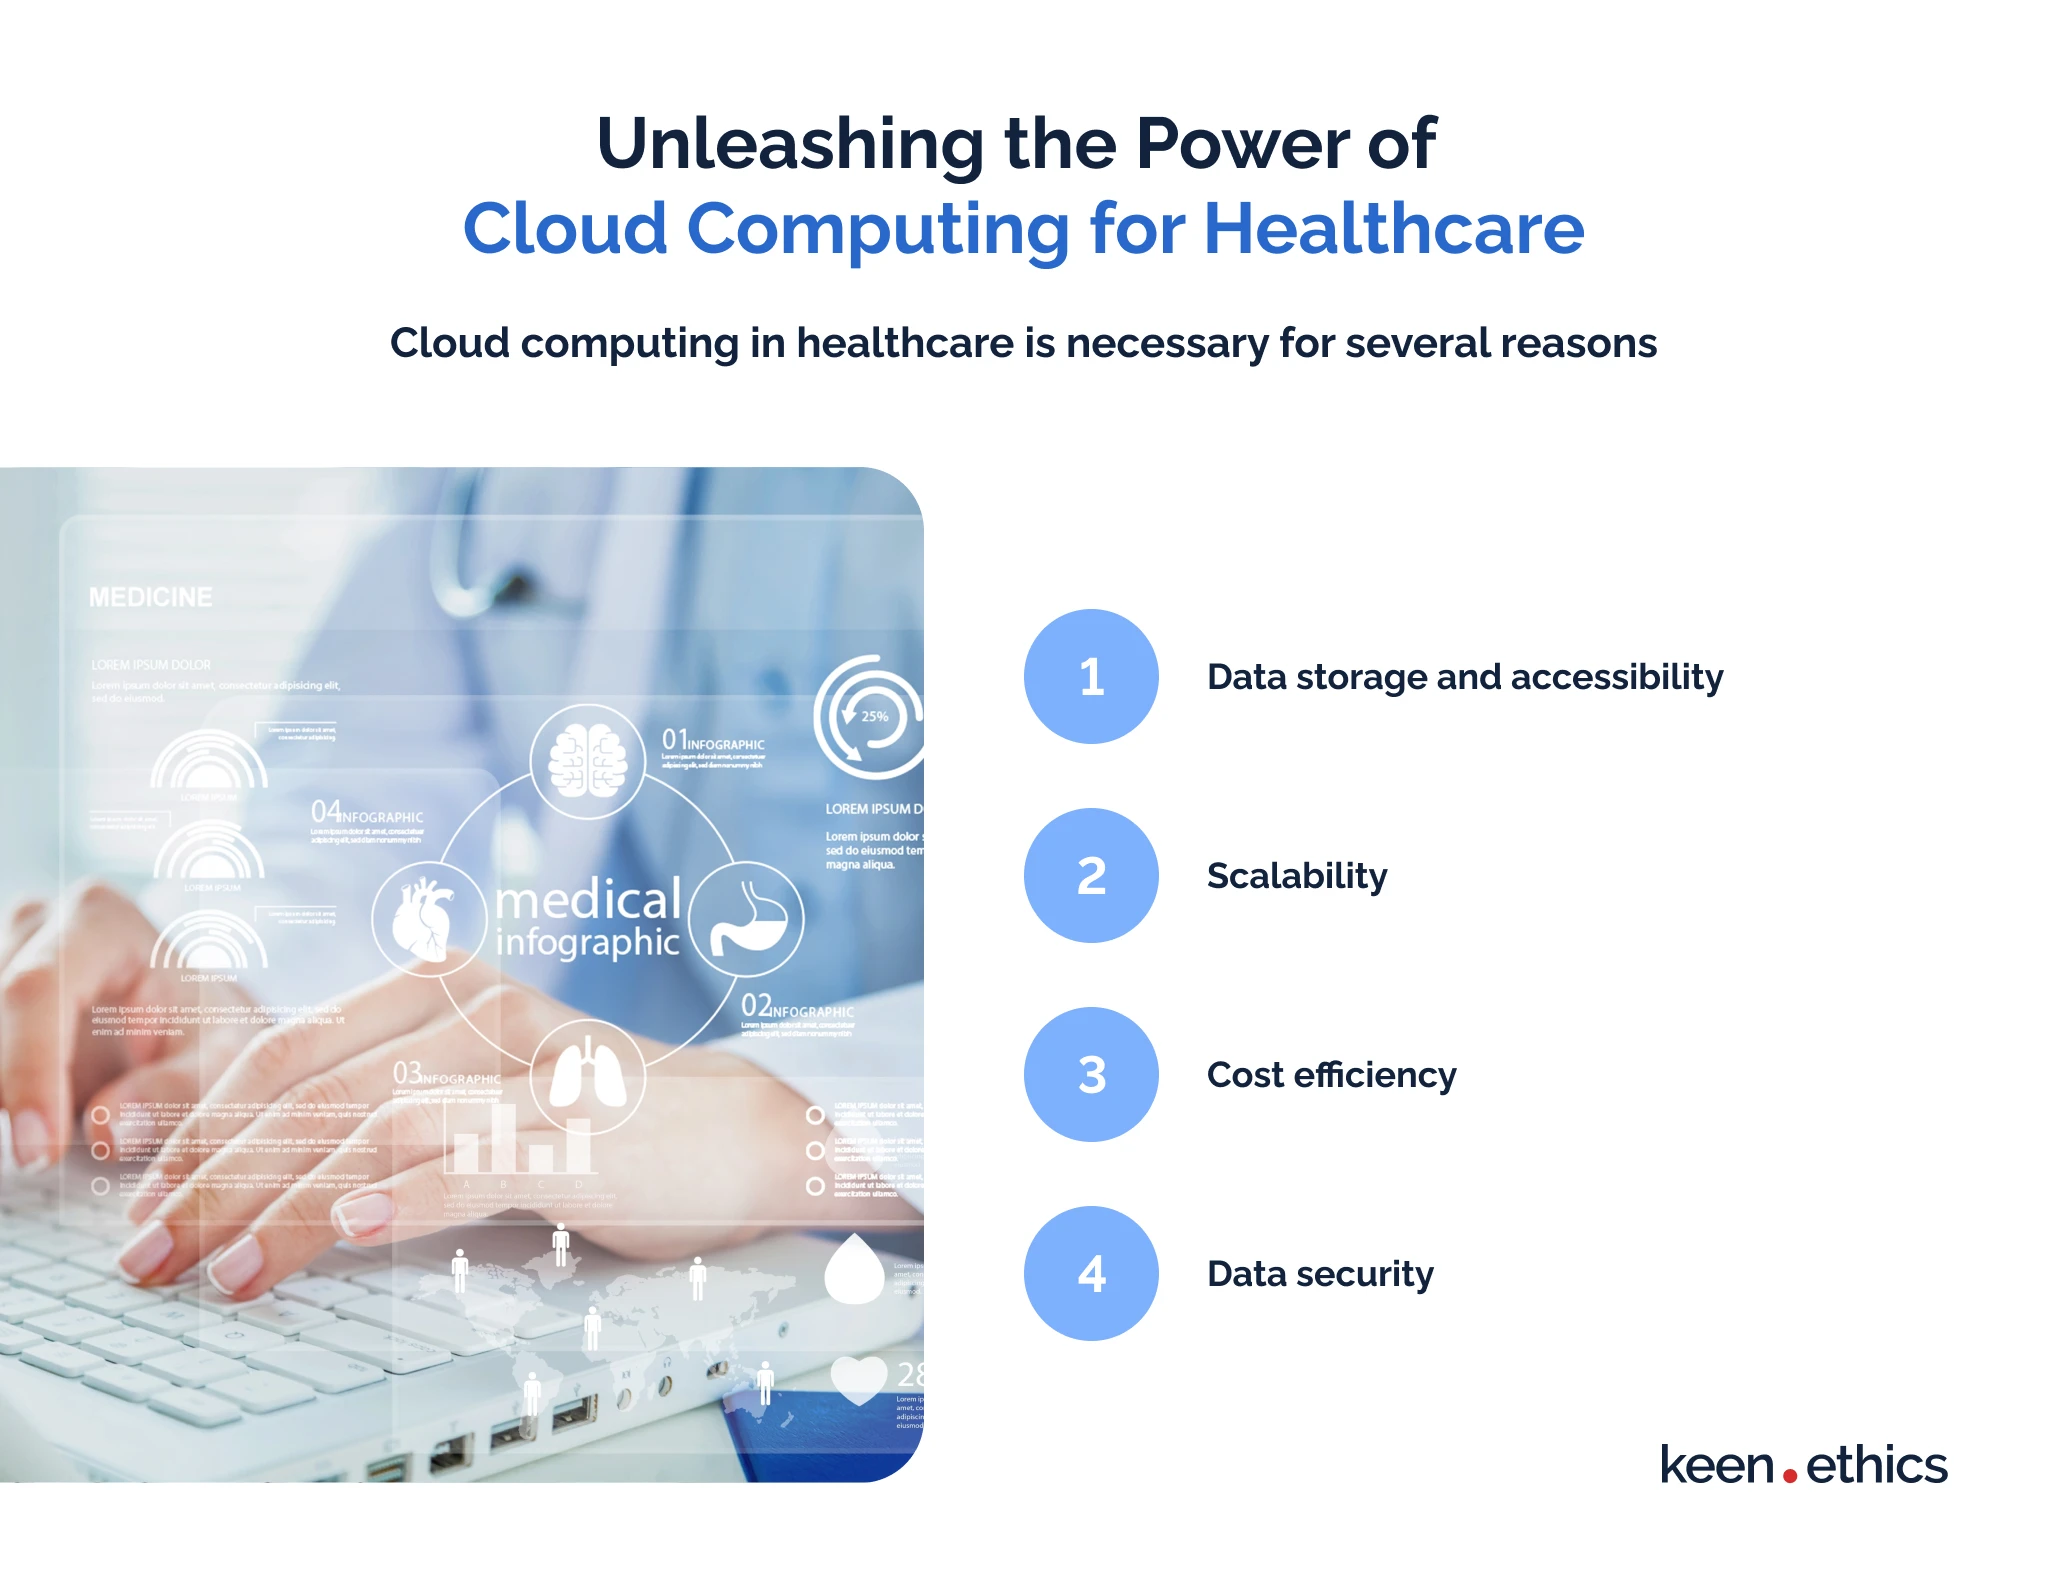 Unleashing the power of cloud computing for healthcare